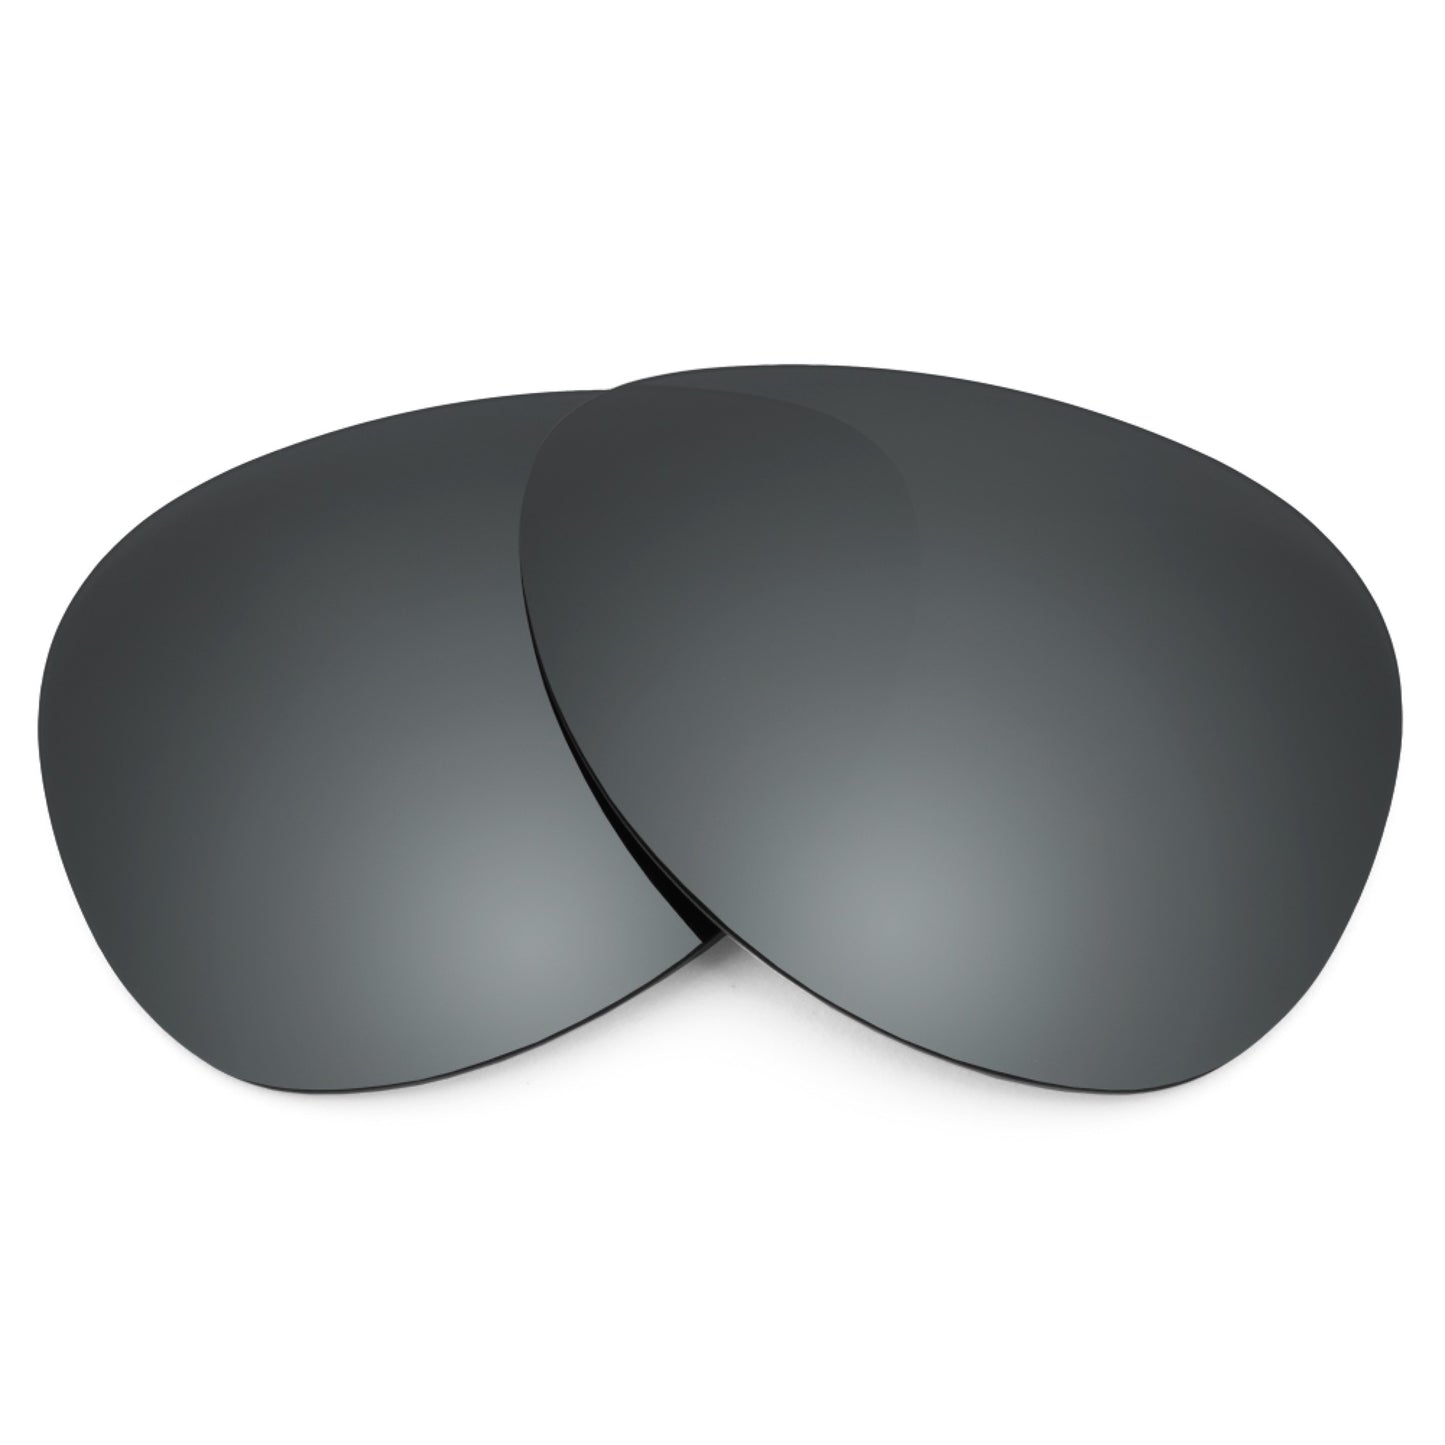 Revant replacement lenses for Ray-Ban RB3386 67mm Non-Polarized Black Chrome